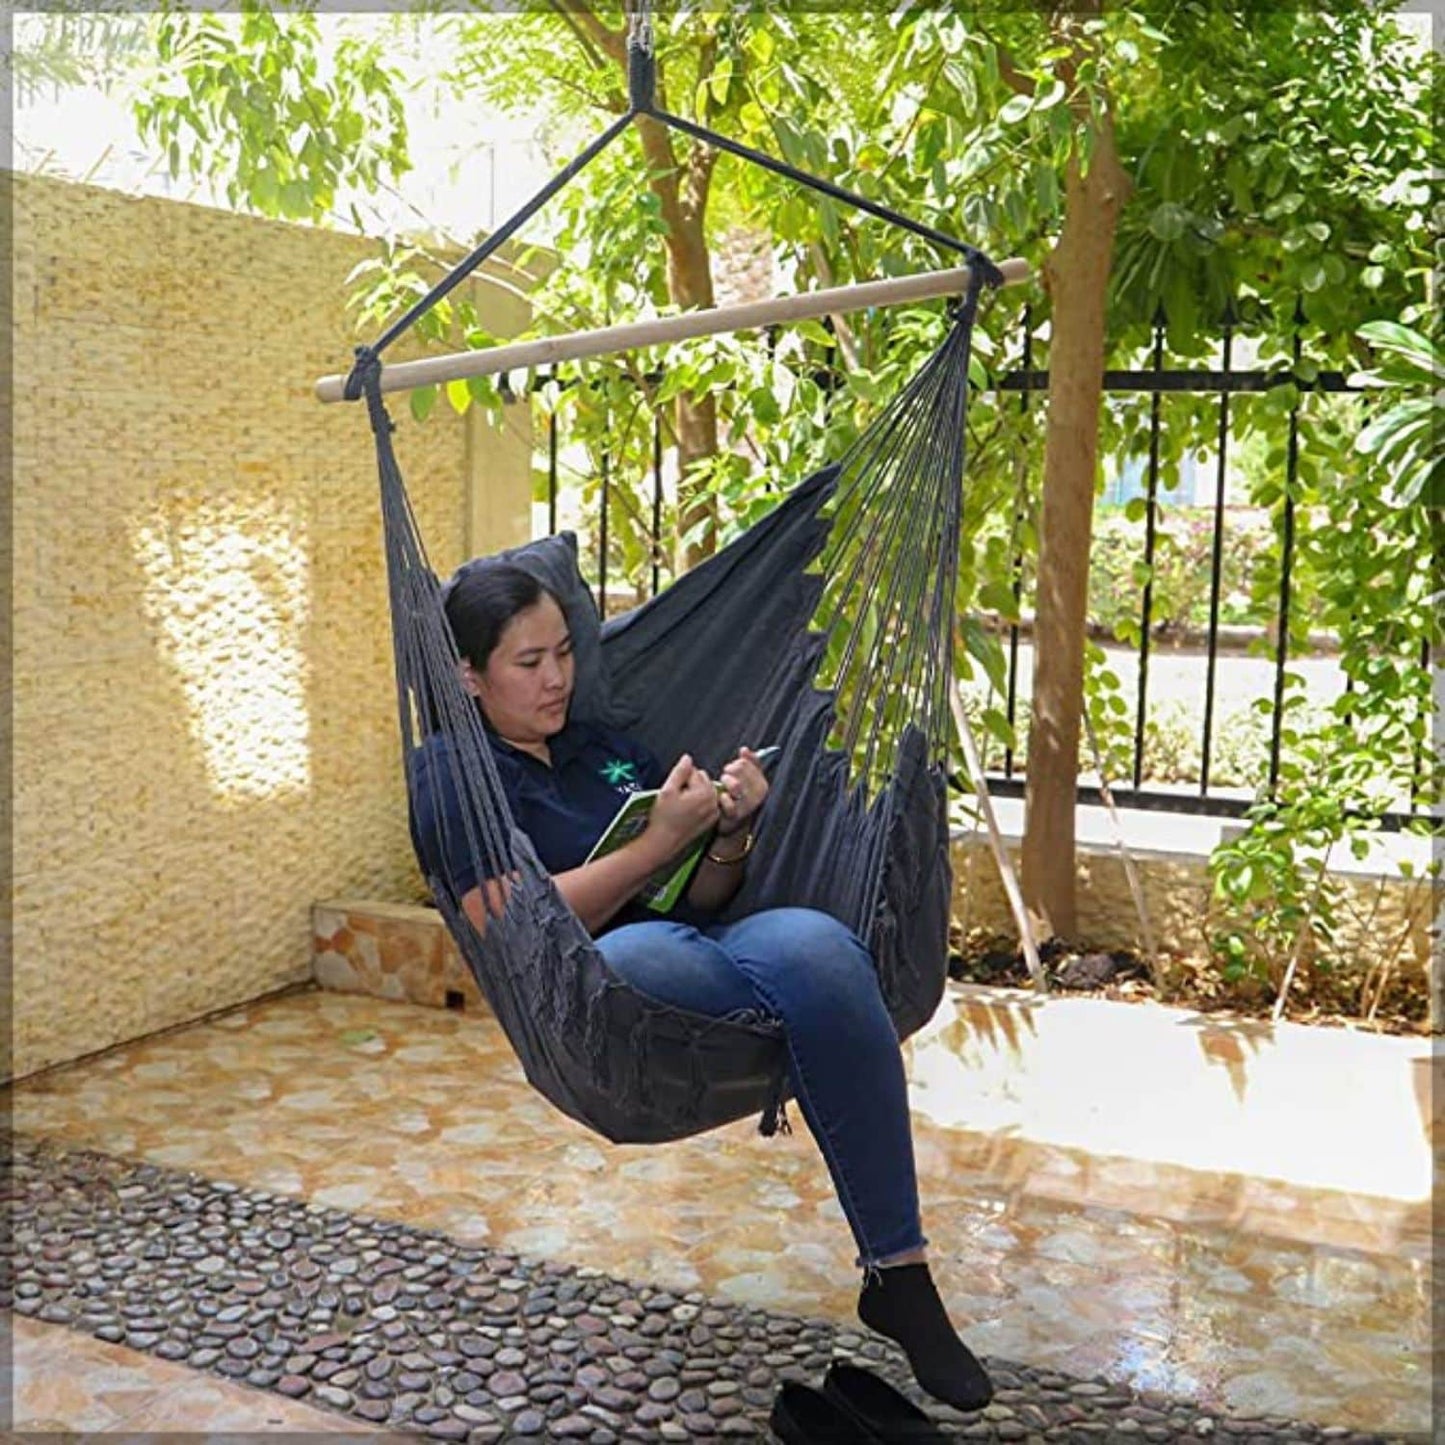 COOLBABY DC01 Premium Soft Hammock Swing Chair - COOLBABY